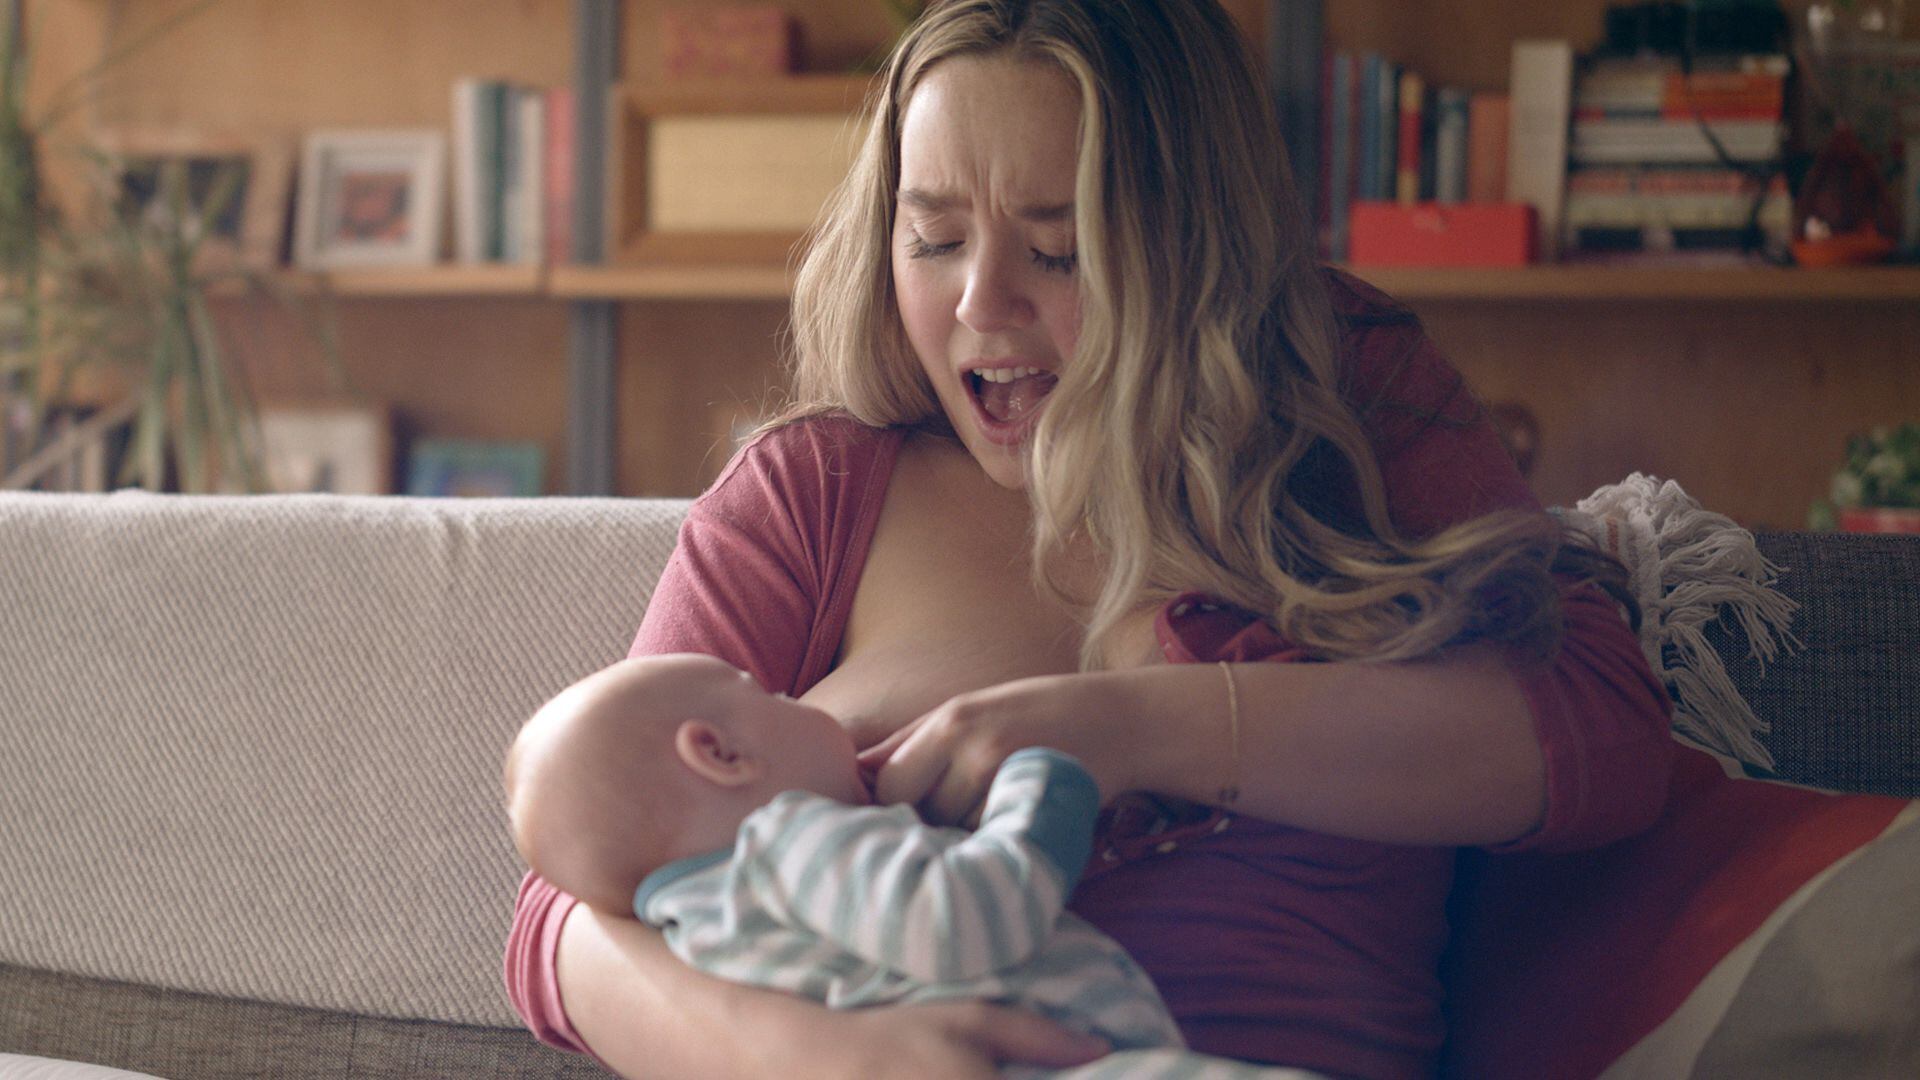 Ad With Realistic Take on Breastfeeding Airing at Golden Globes